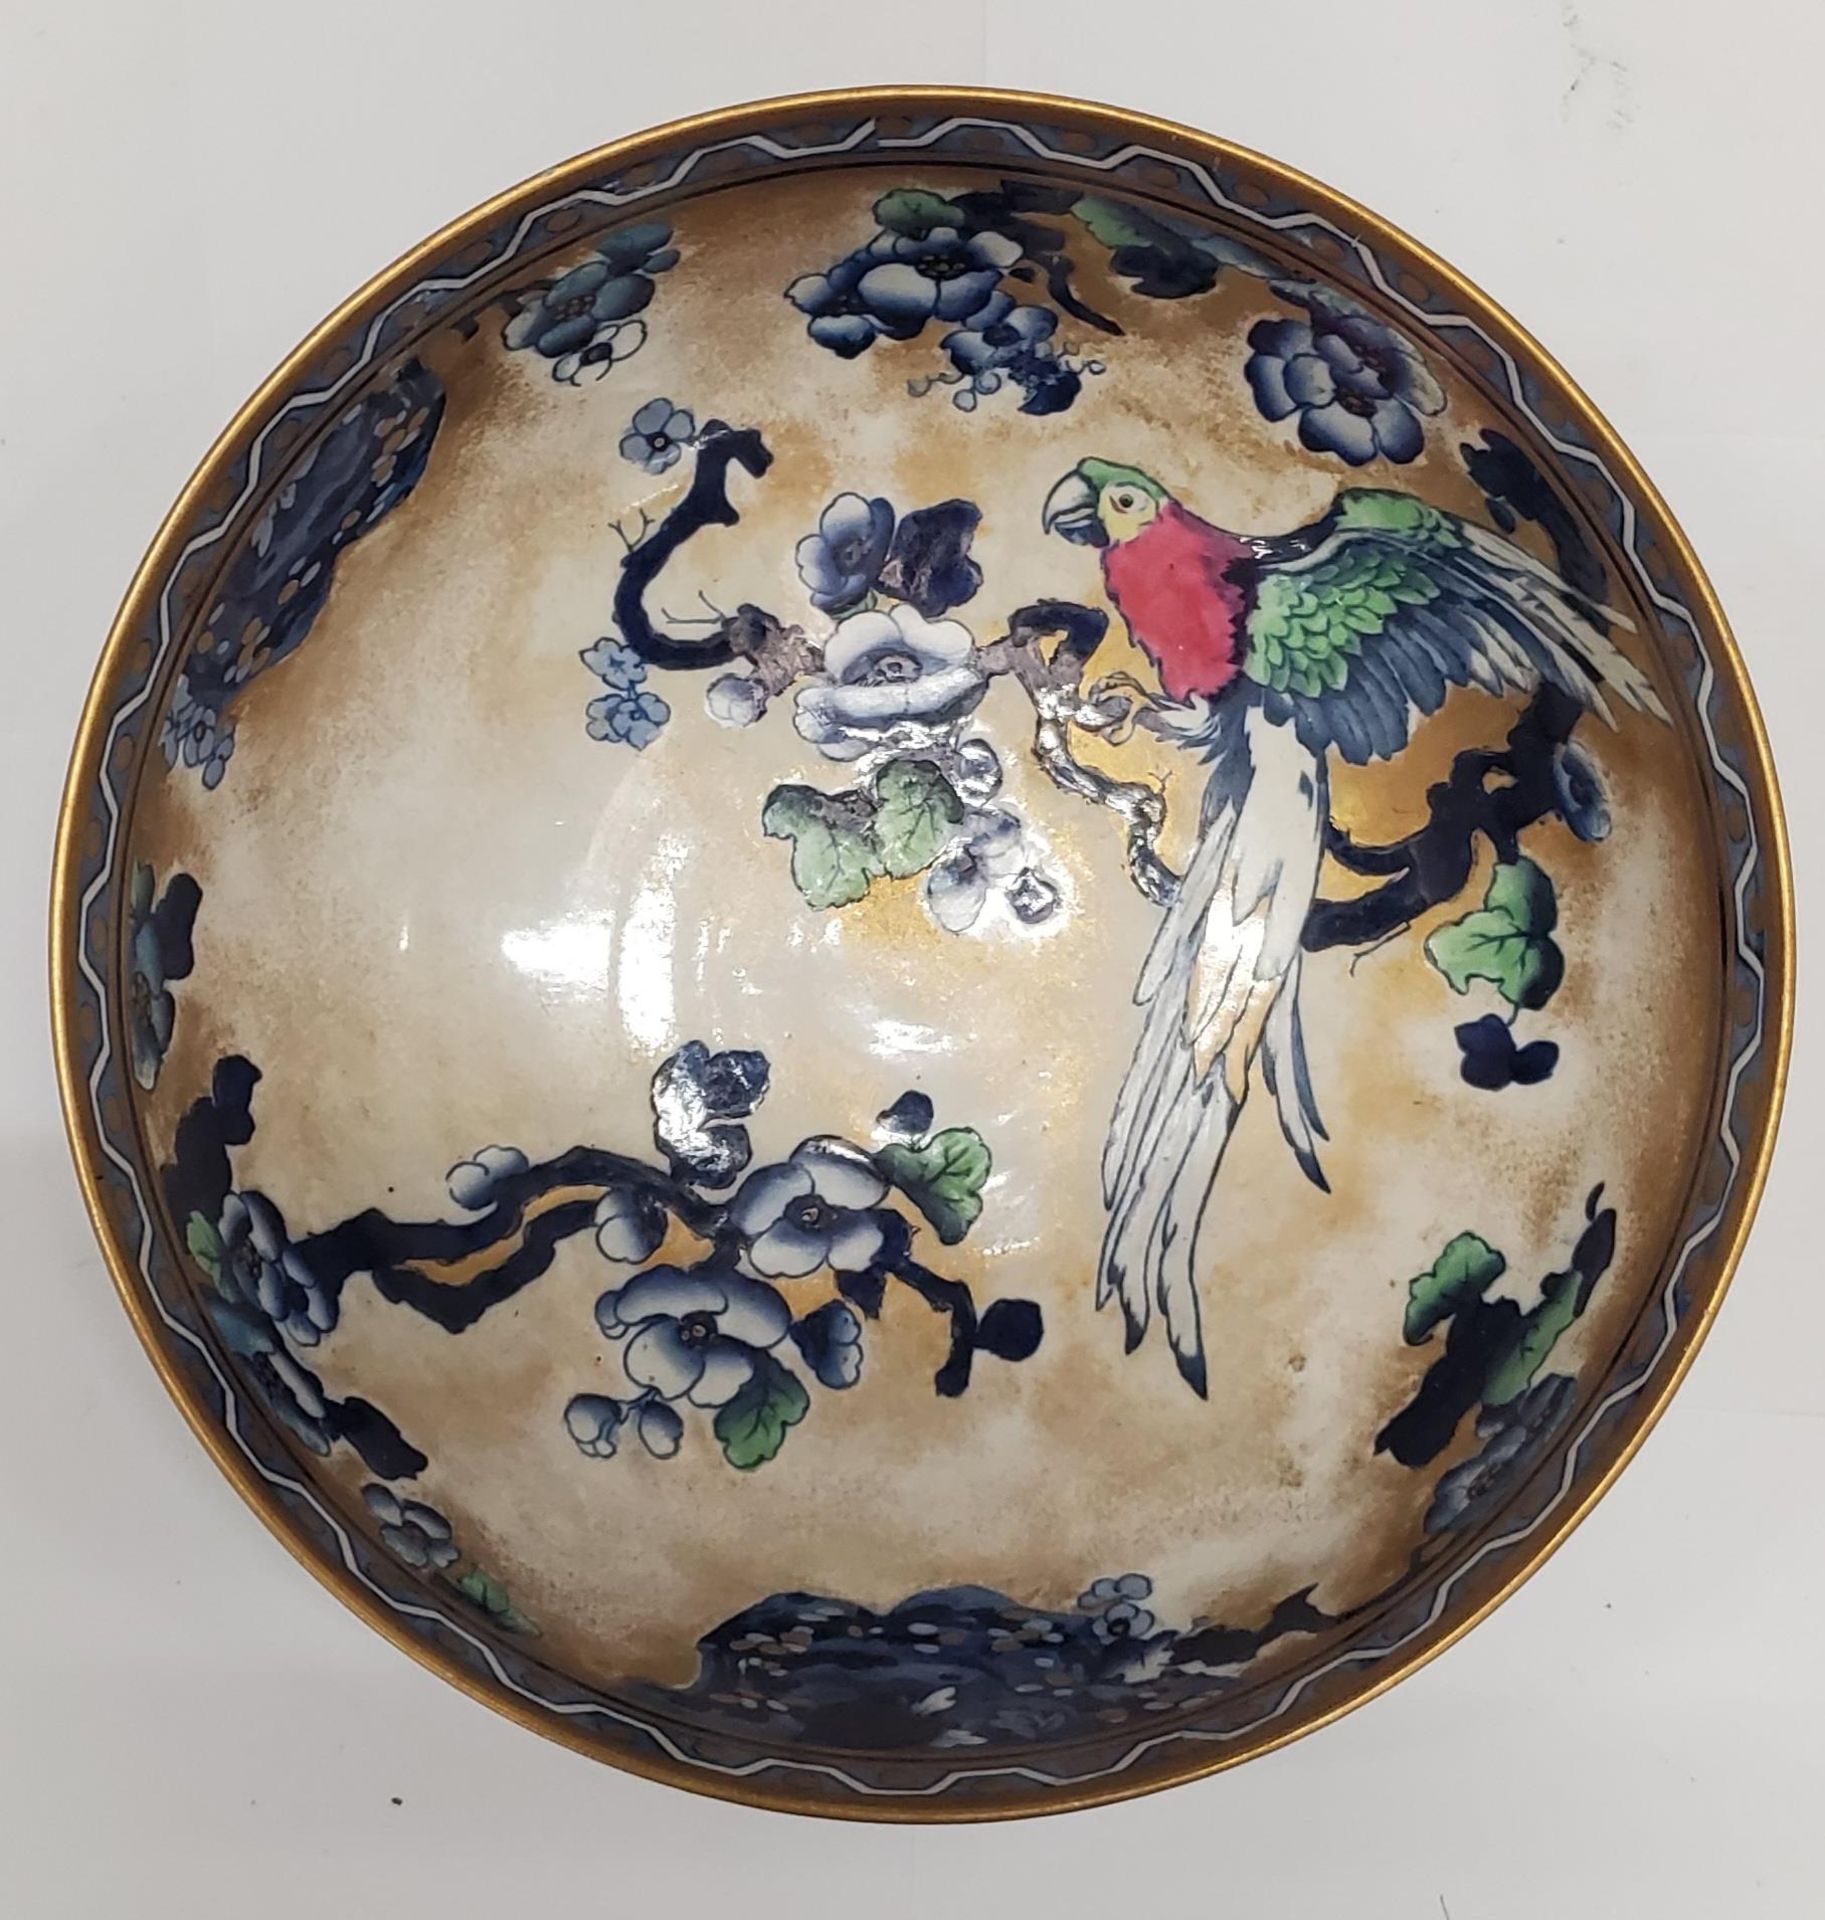 TWO LARGE LOSOL WARE BOWLS DECORATED WITH PARROTS AND FOLIAGE - Image 4 of 5